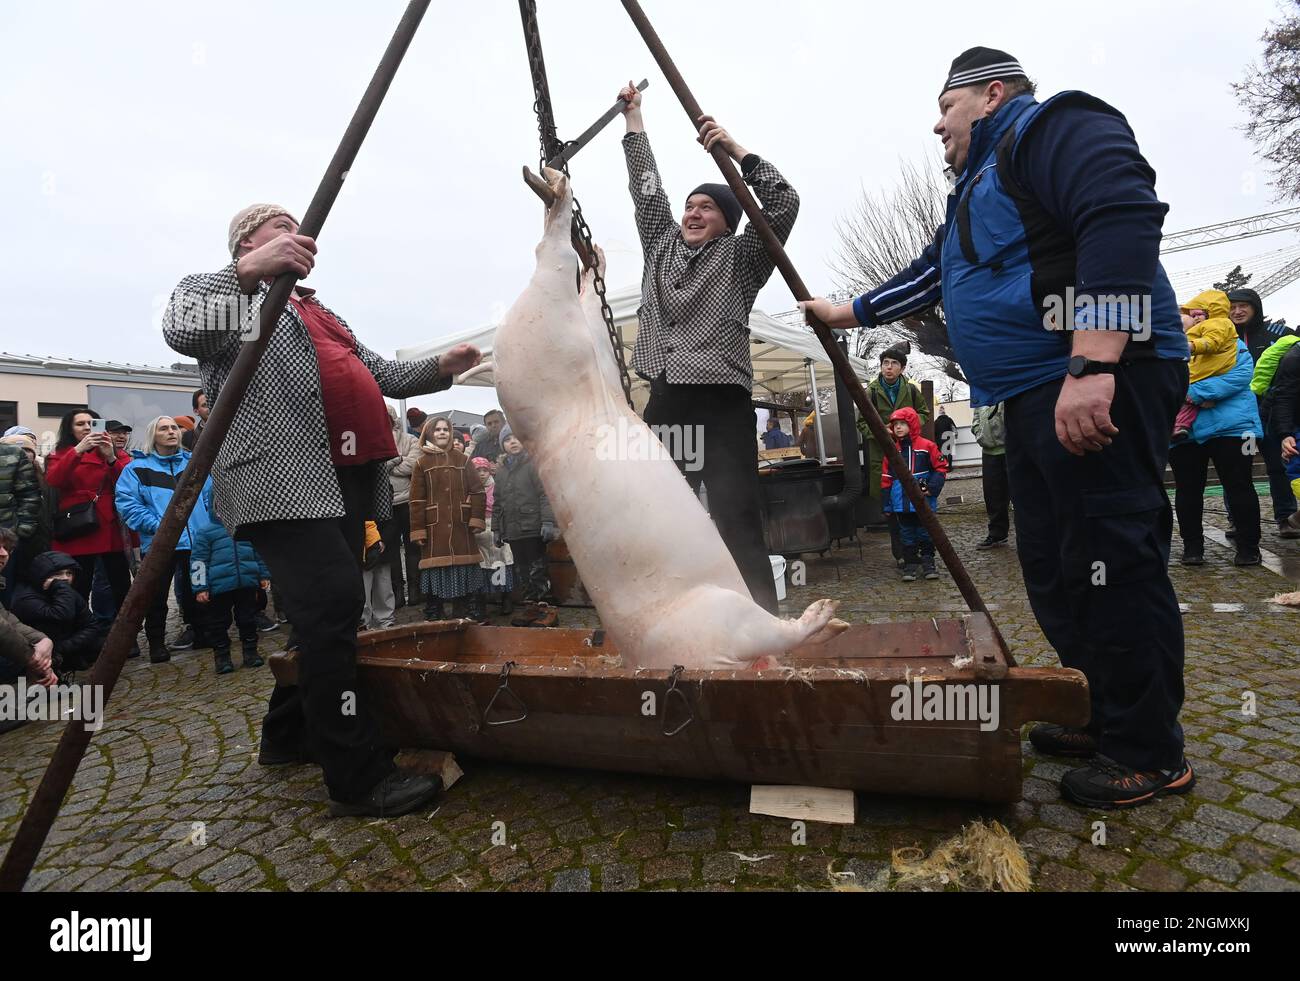 Velka Bystrice, Czech Republic. 18th Feb, 2023. Traditional Slavic carnival was held on February 18, 2023, in Velka Bystrice, Czech Republic. On the photo is seen a pig slaughtering, part of the carnival. Credit: Ludek Perina/CTK Photo/Alamy Live News Stock Photo